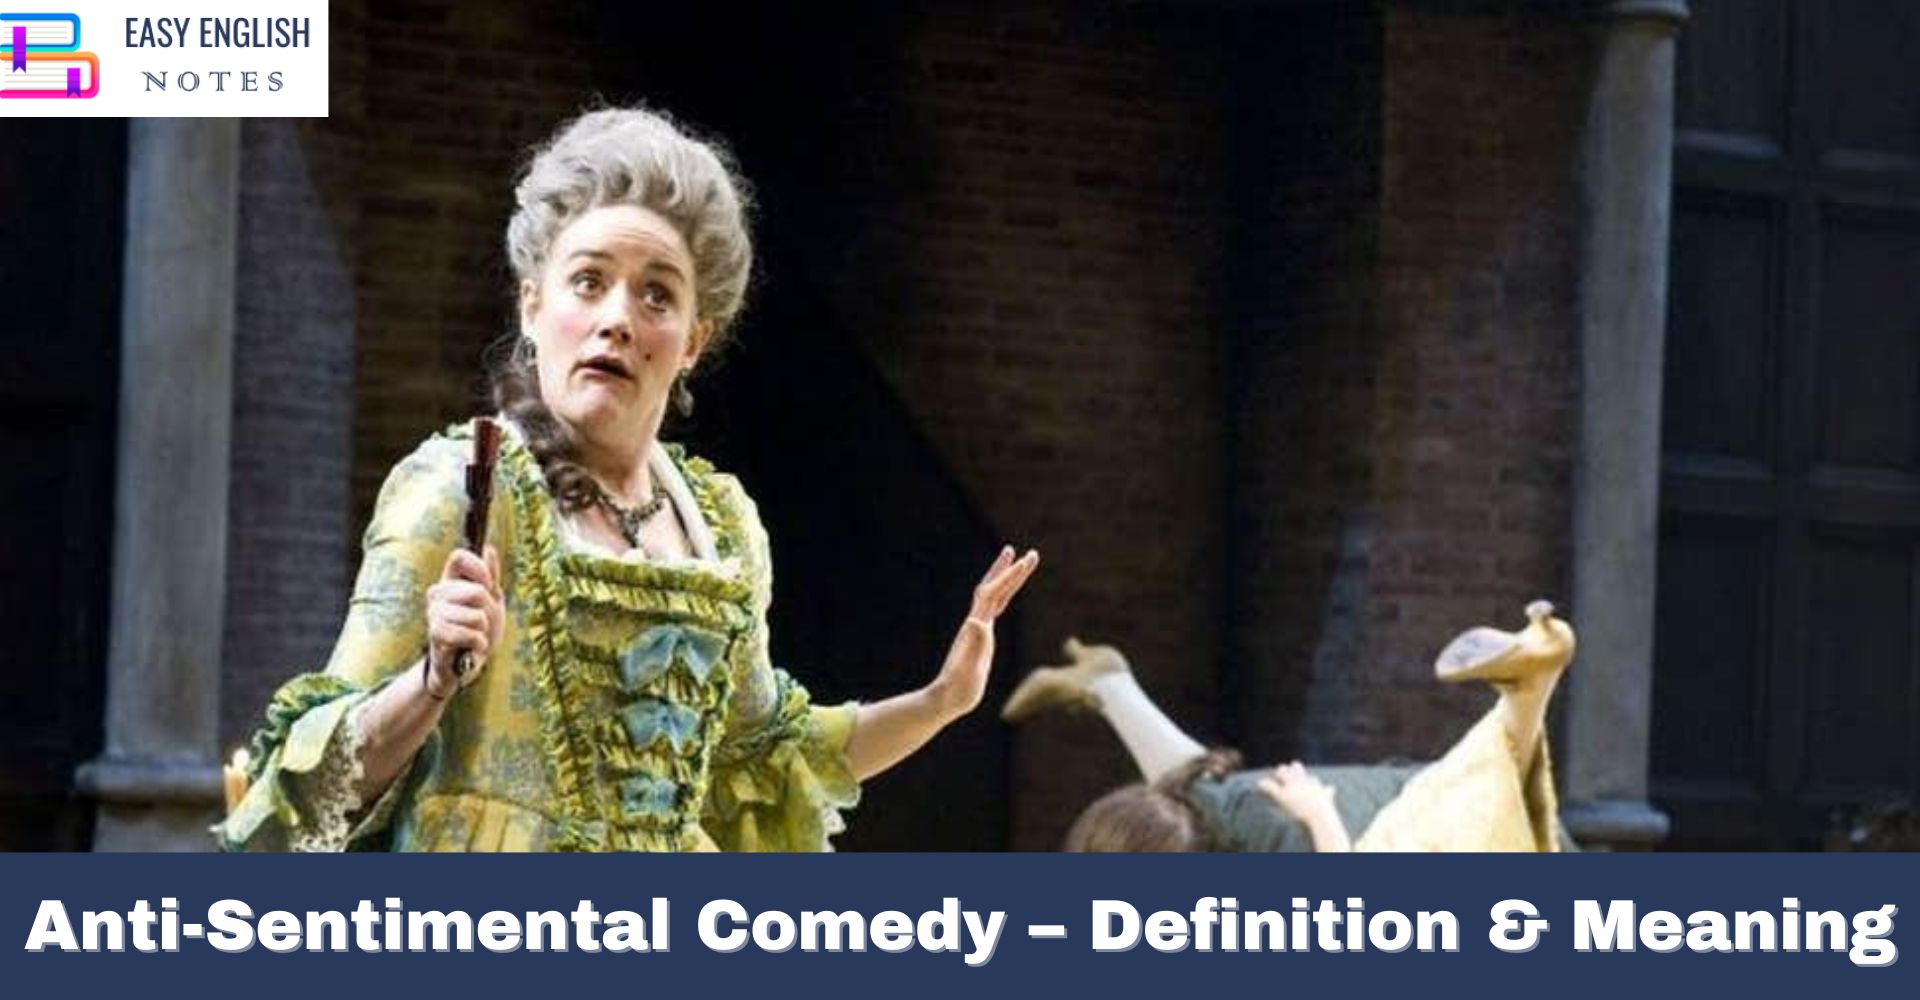 Anti-Sentimental Comedy – Definition & Meaning